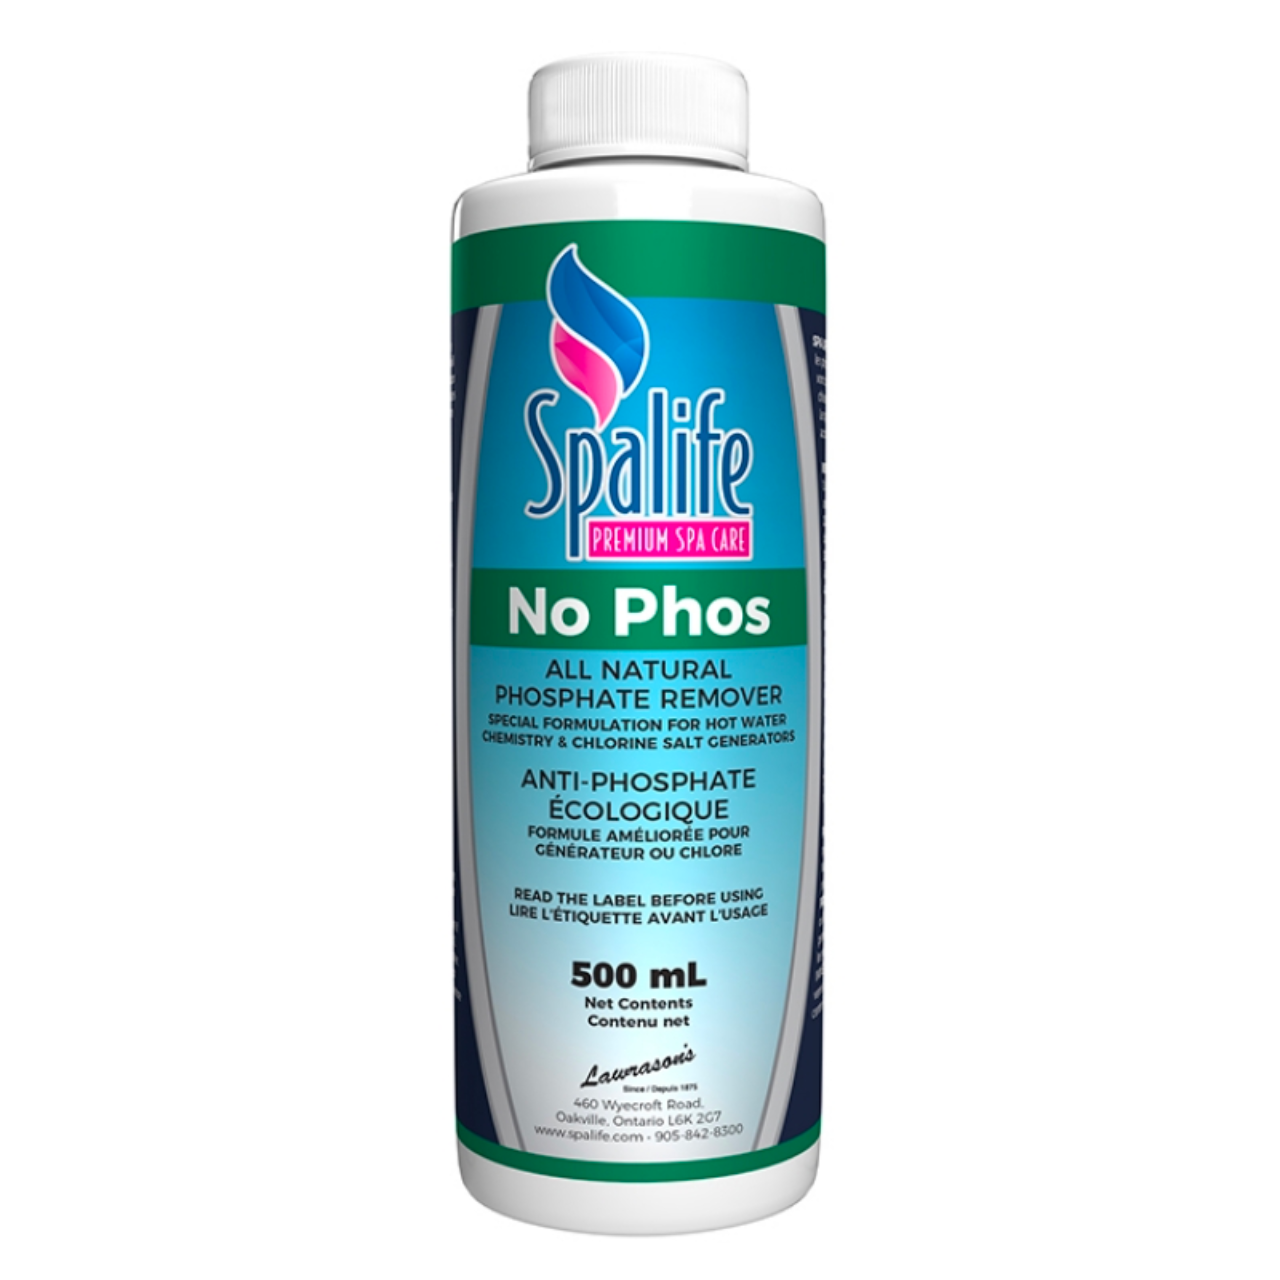 Spa Life No Phos - All Natural Phosphate Remover